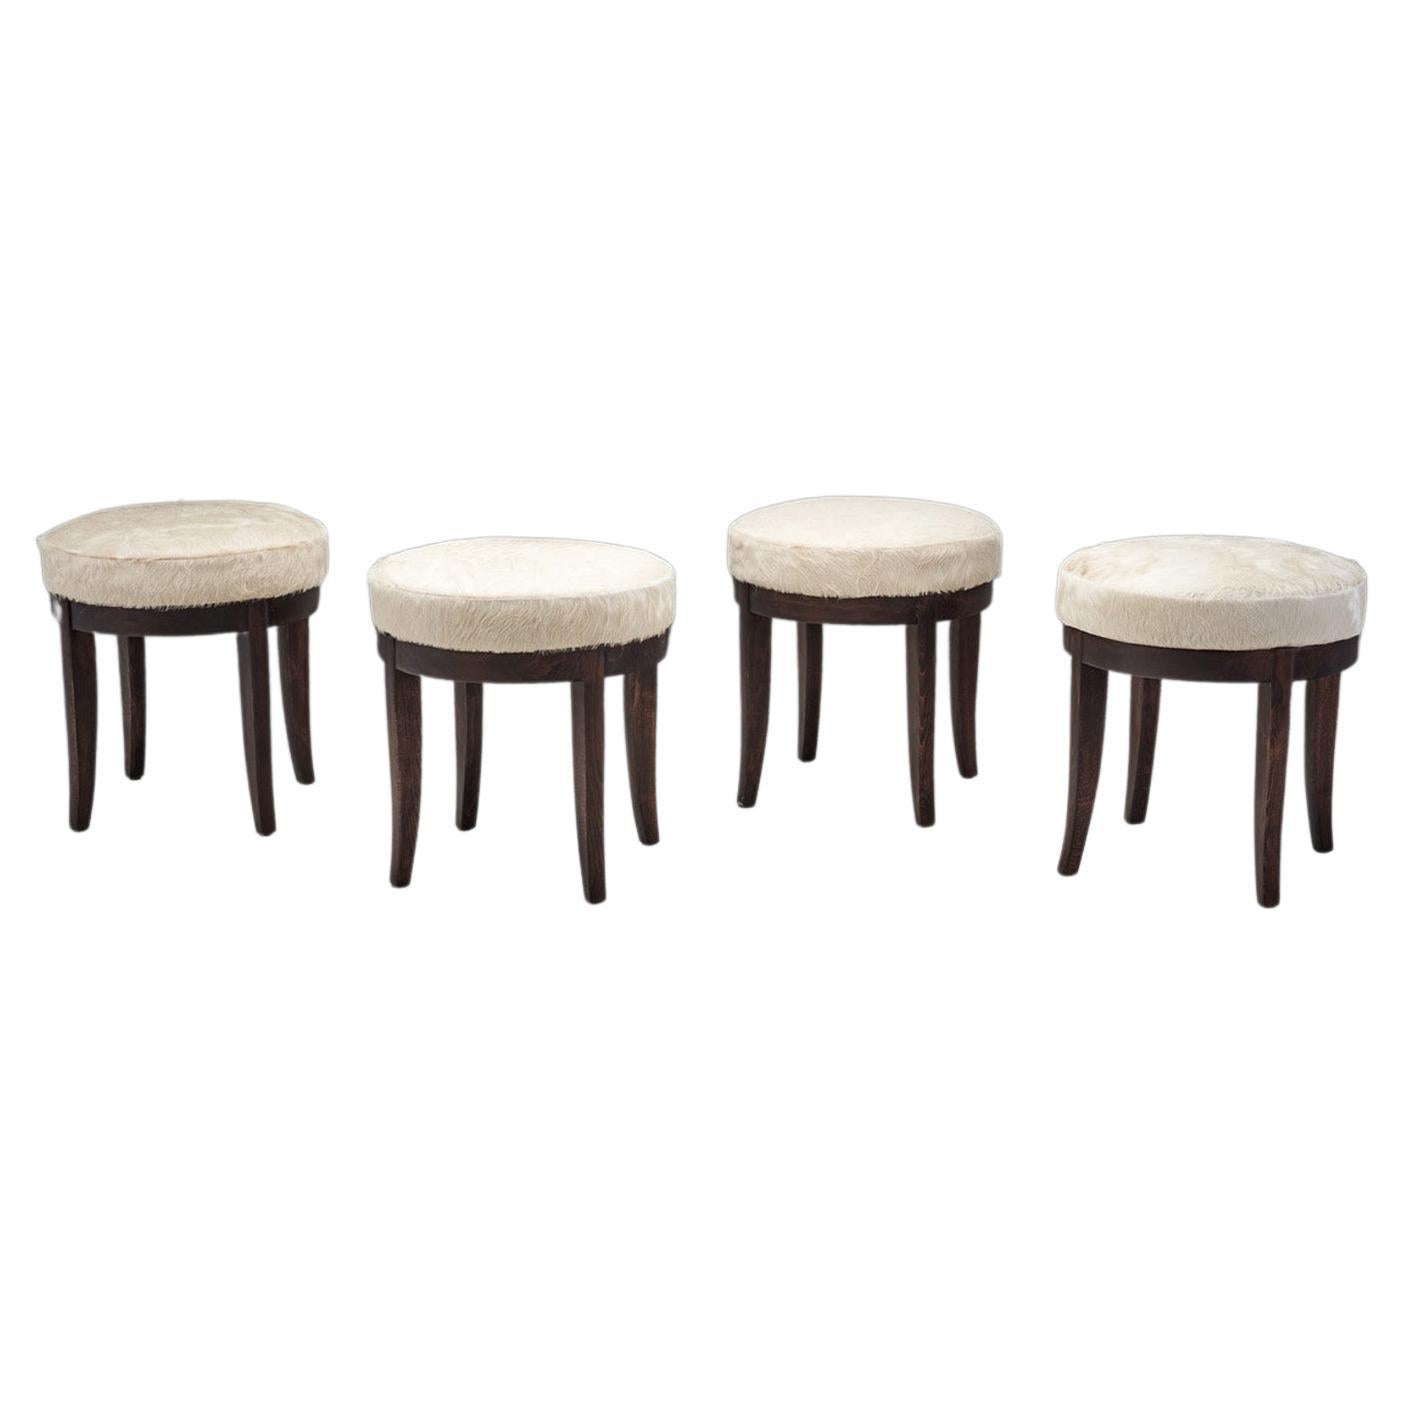 Mid-Century Modern Set of Four Stools in Cowhide, Europe, ca 1950s